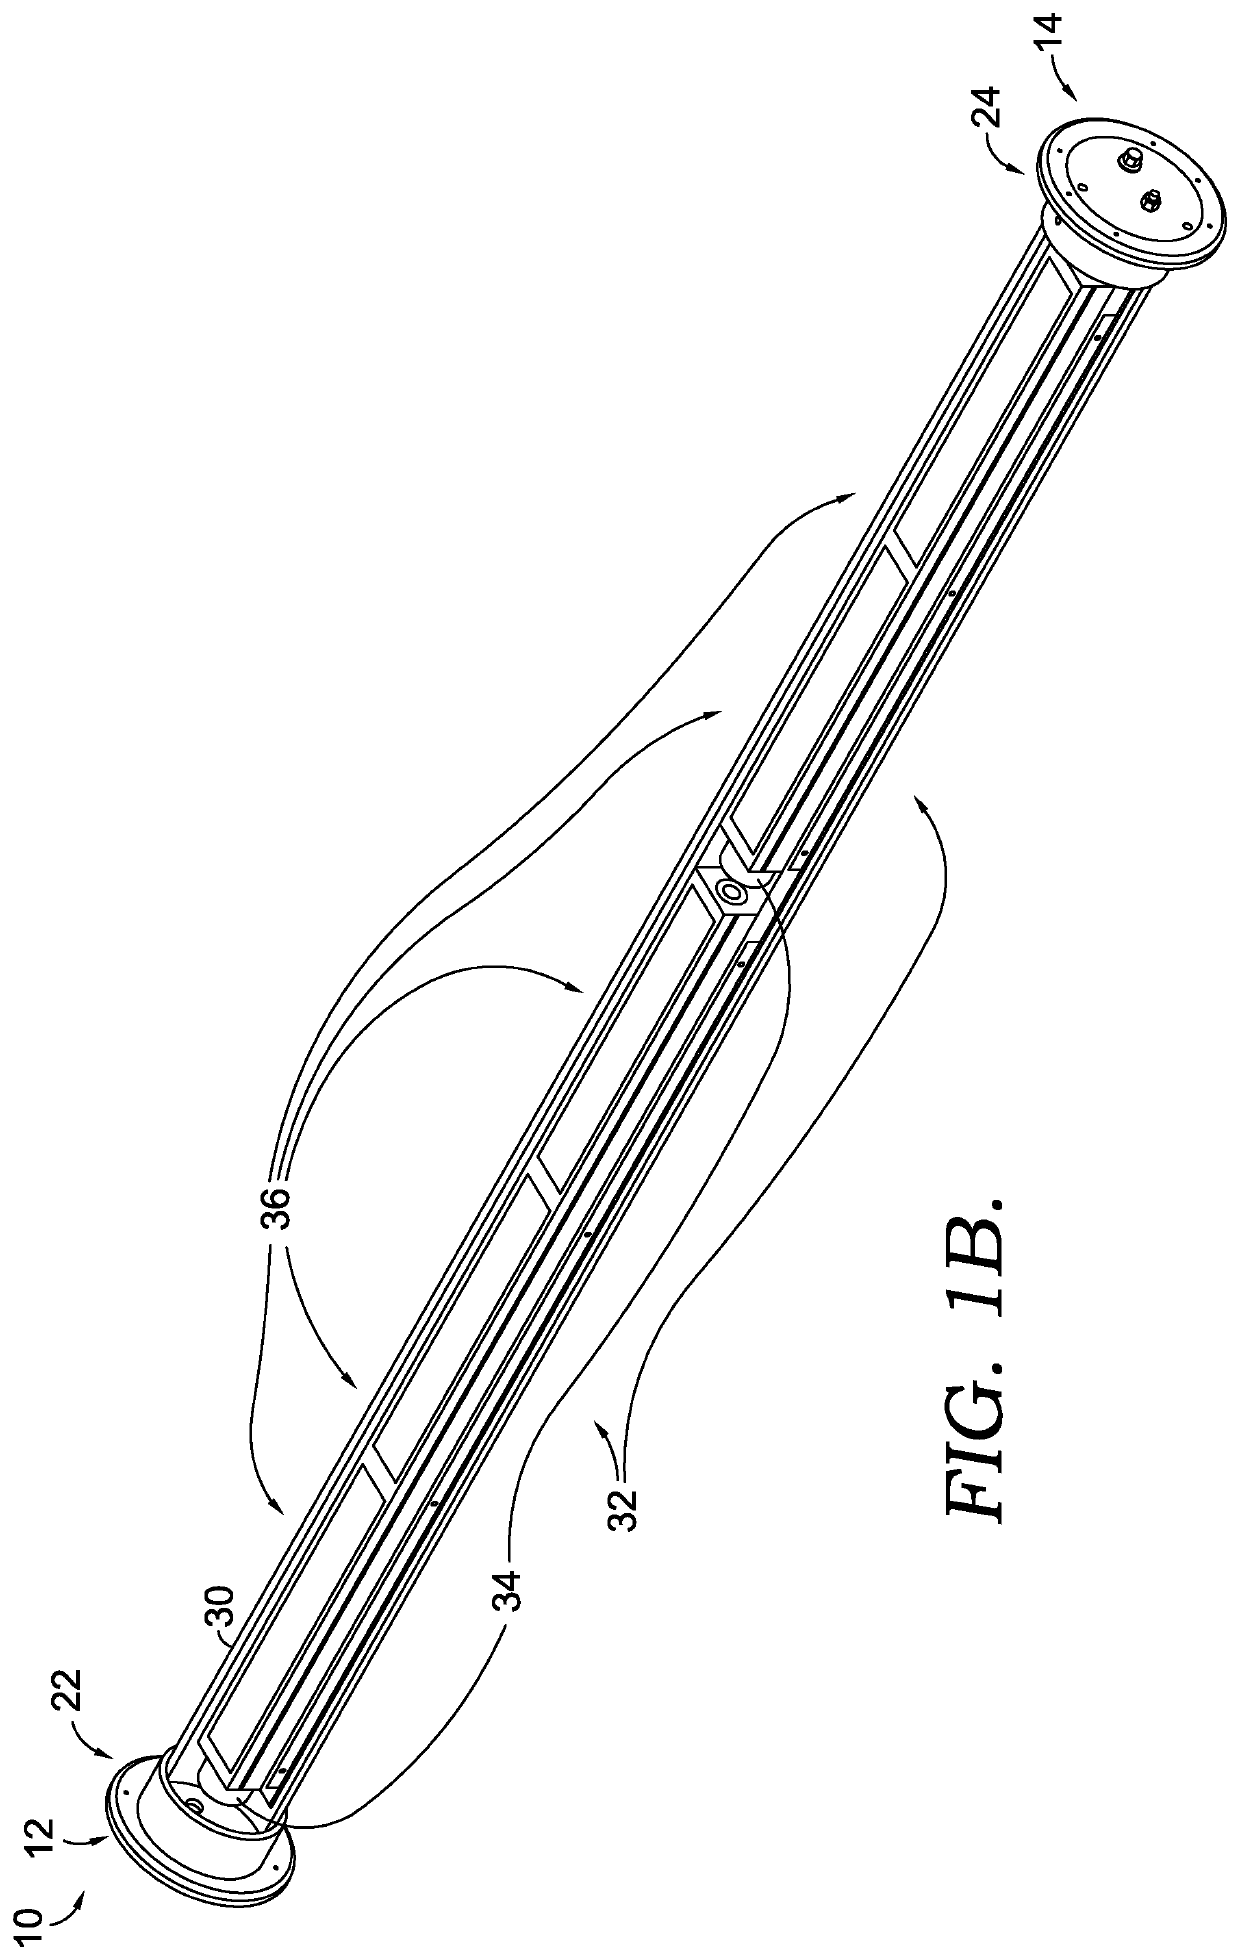 Systems and methods of improved plant cultivation and elongate airflow assembly for the same